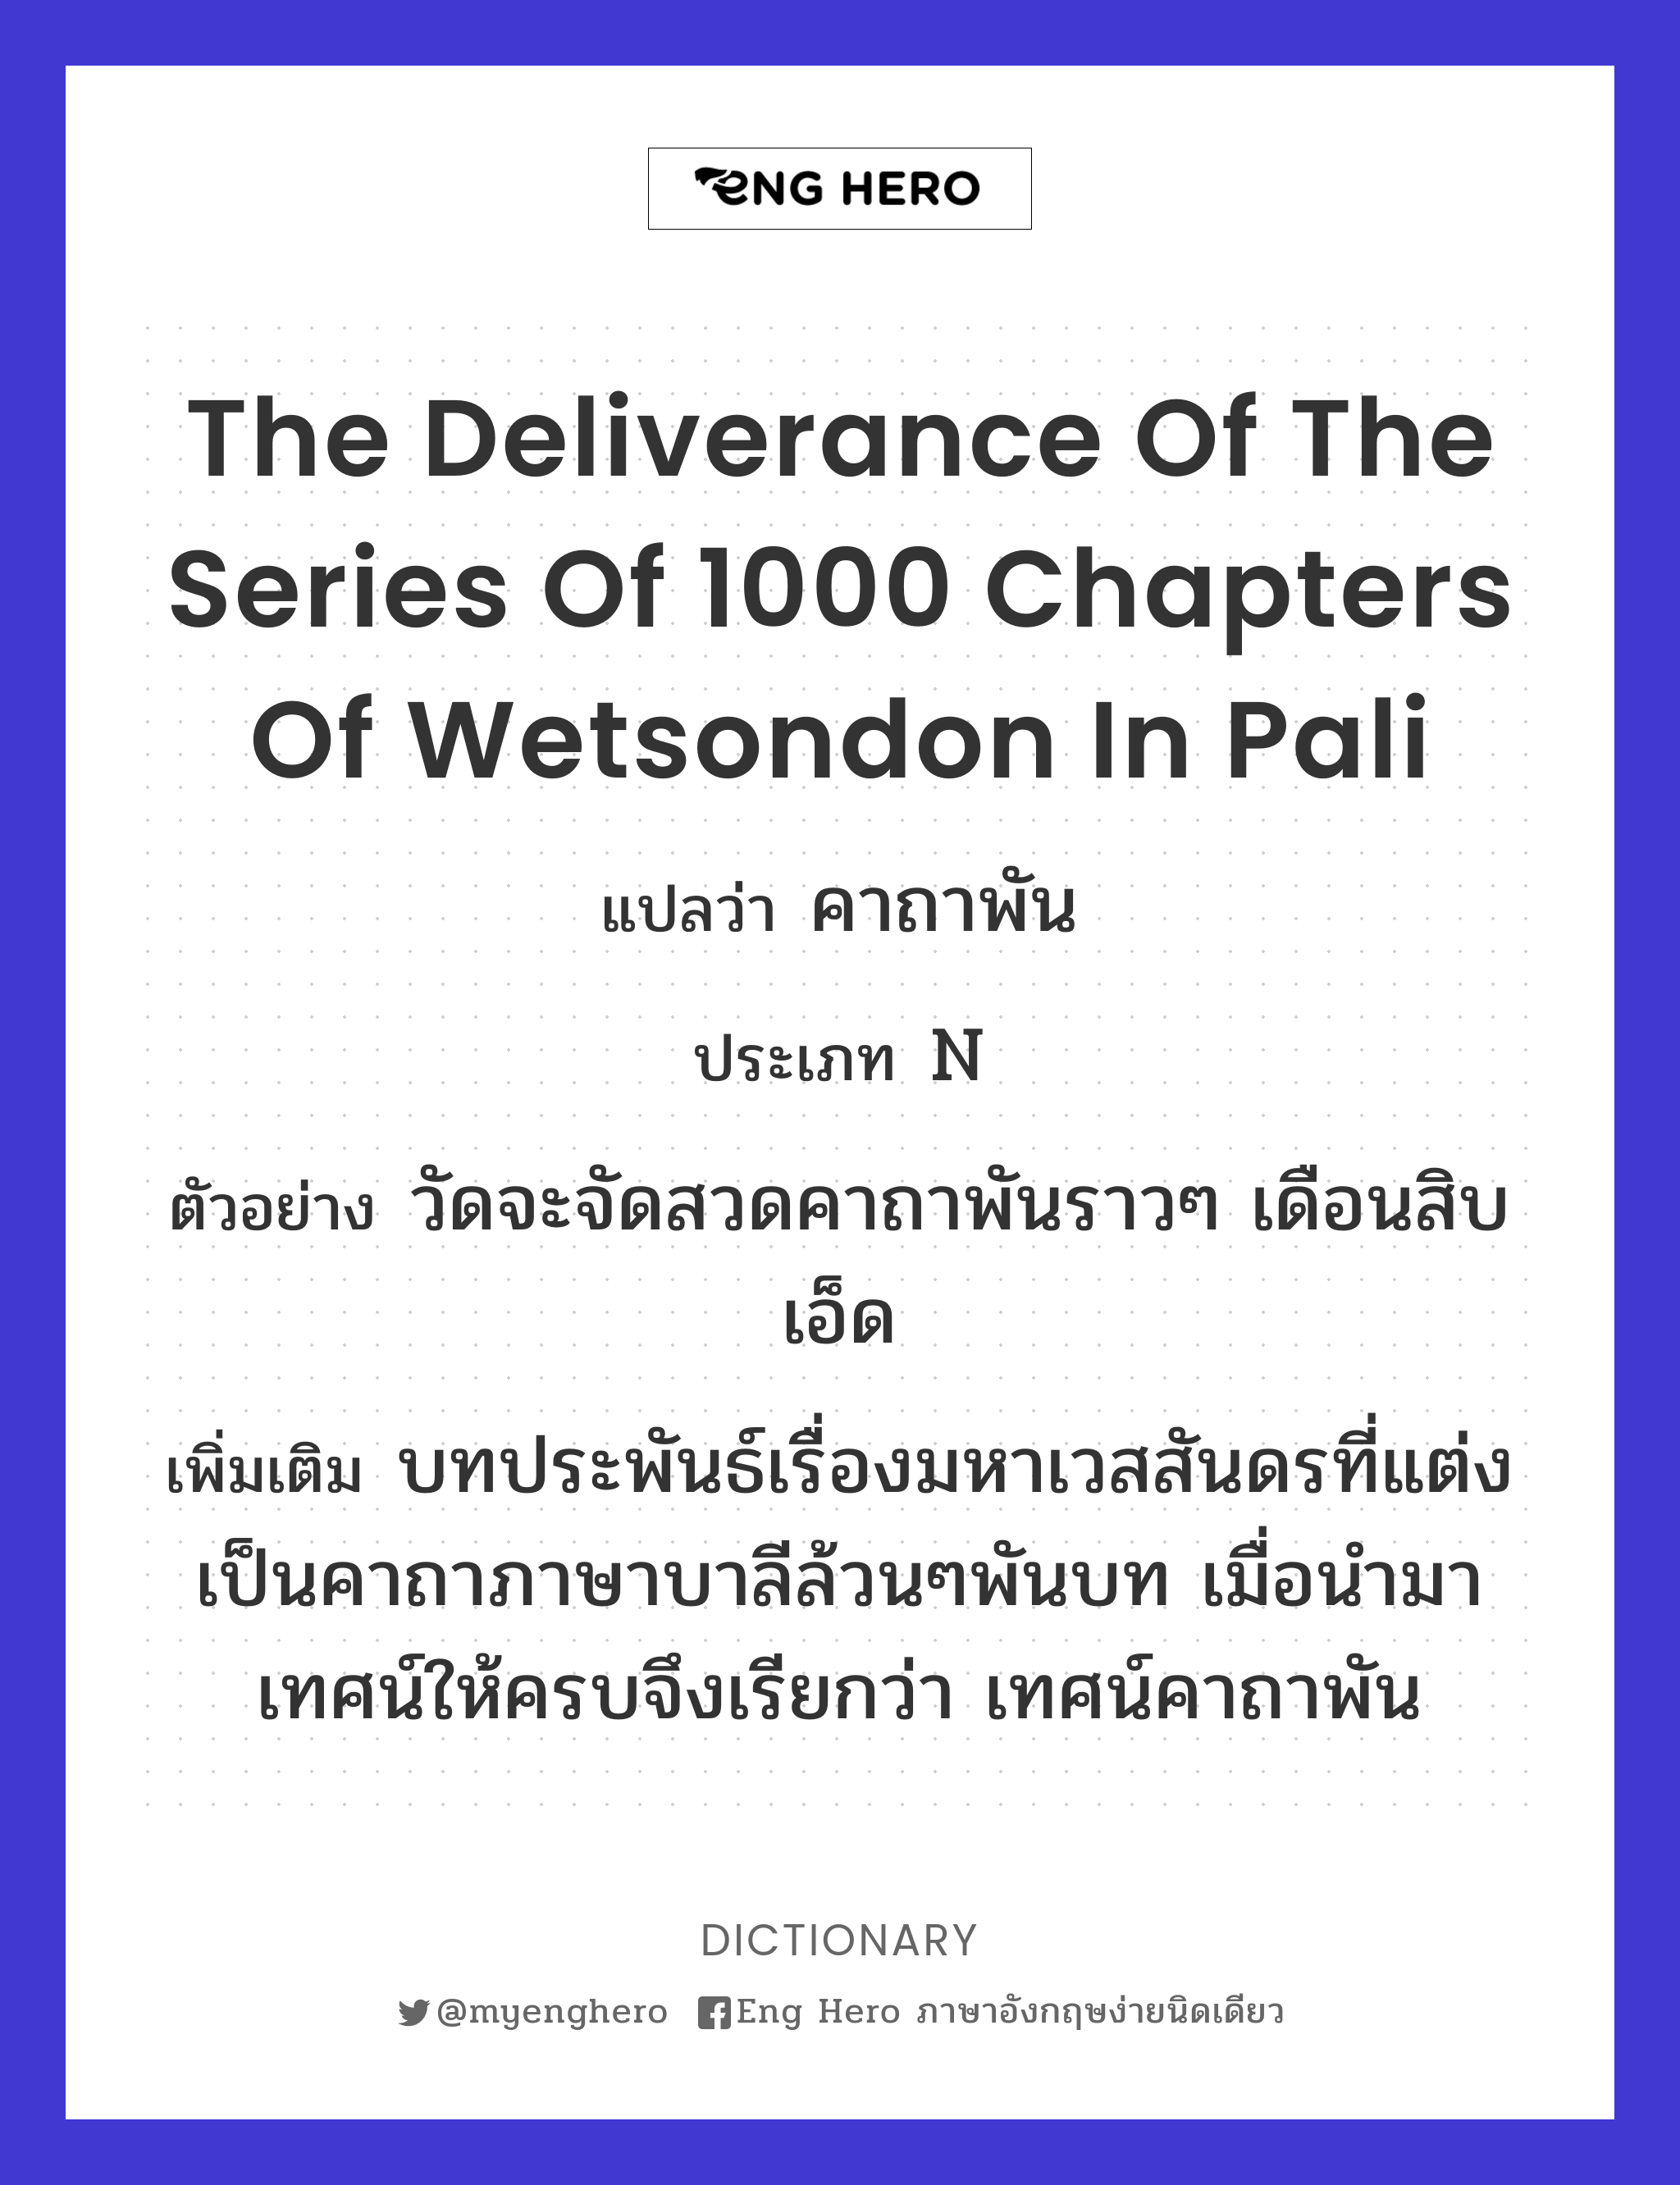 the deliverance of the series of 1000 chapters of Wetsondon in Pali